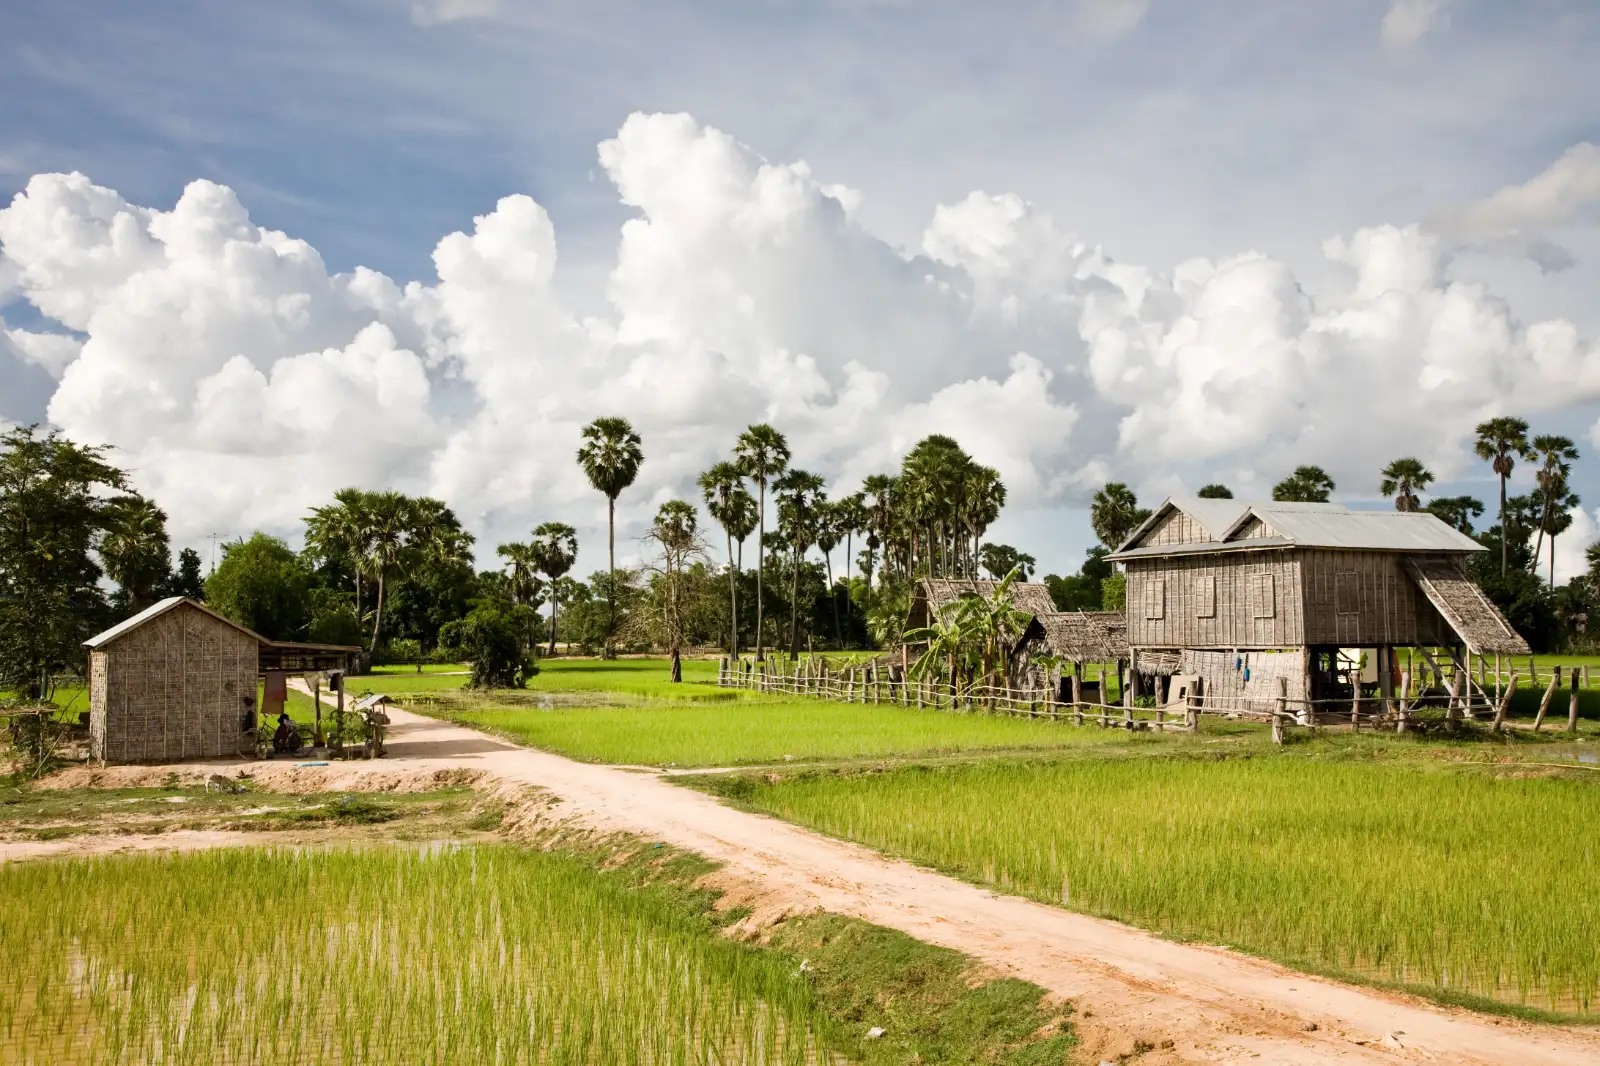 A Cambodian village in the sunshine, huts and a dusty path through the middle